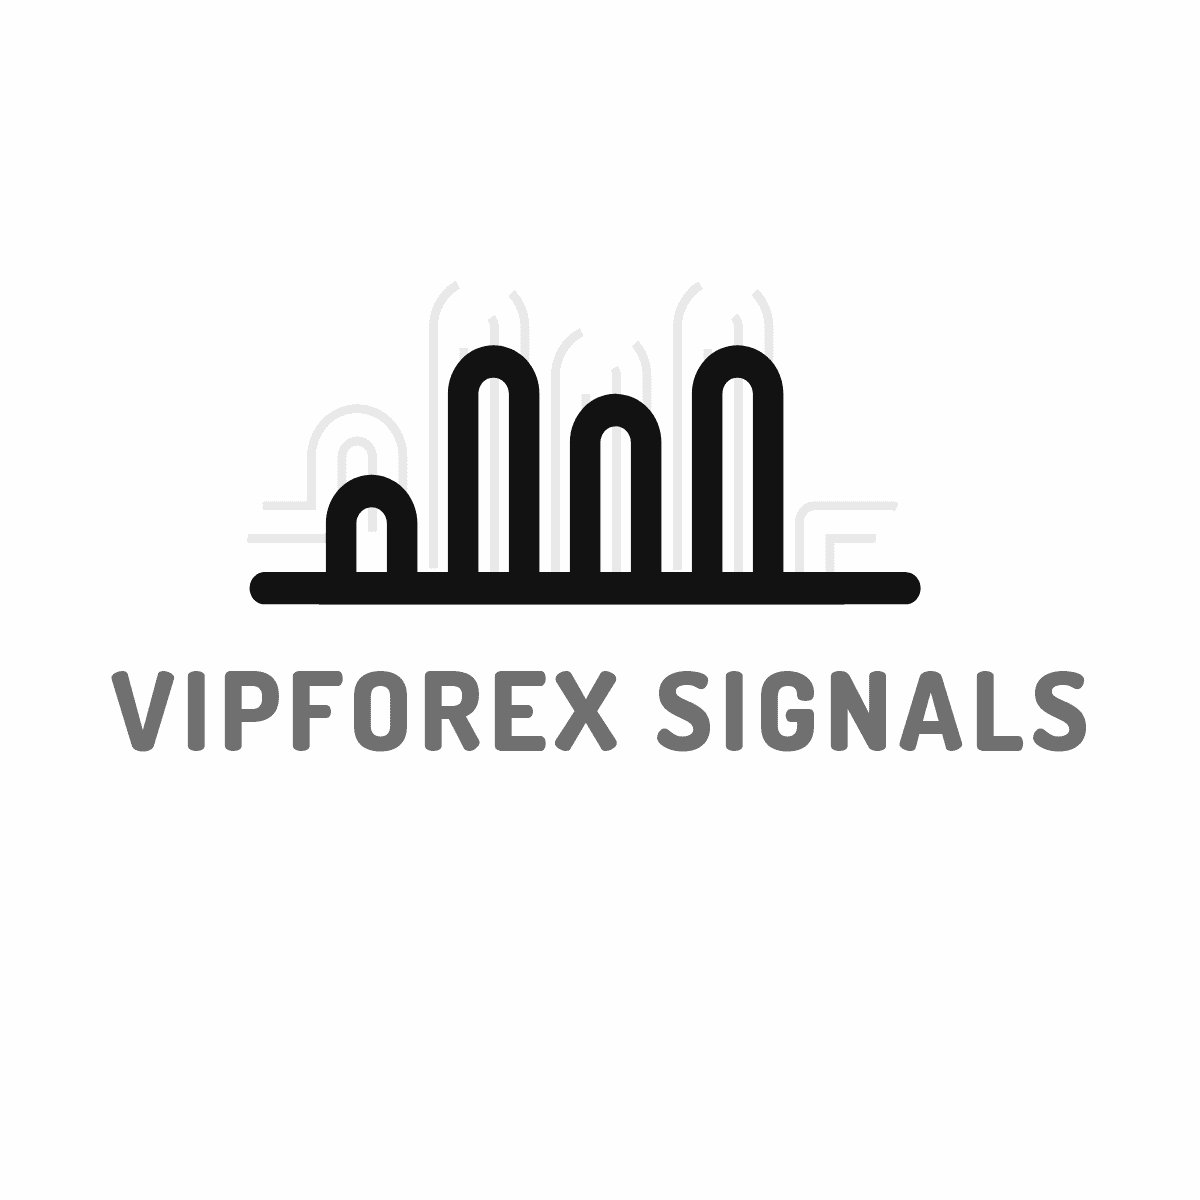 Forex Signals – How To Find The Best Forex Signals in France 2020